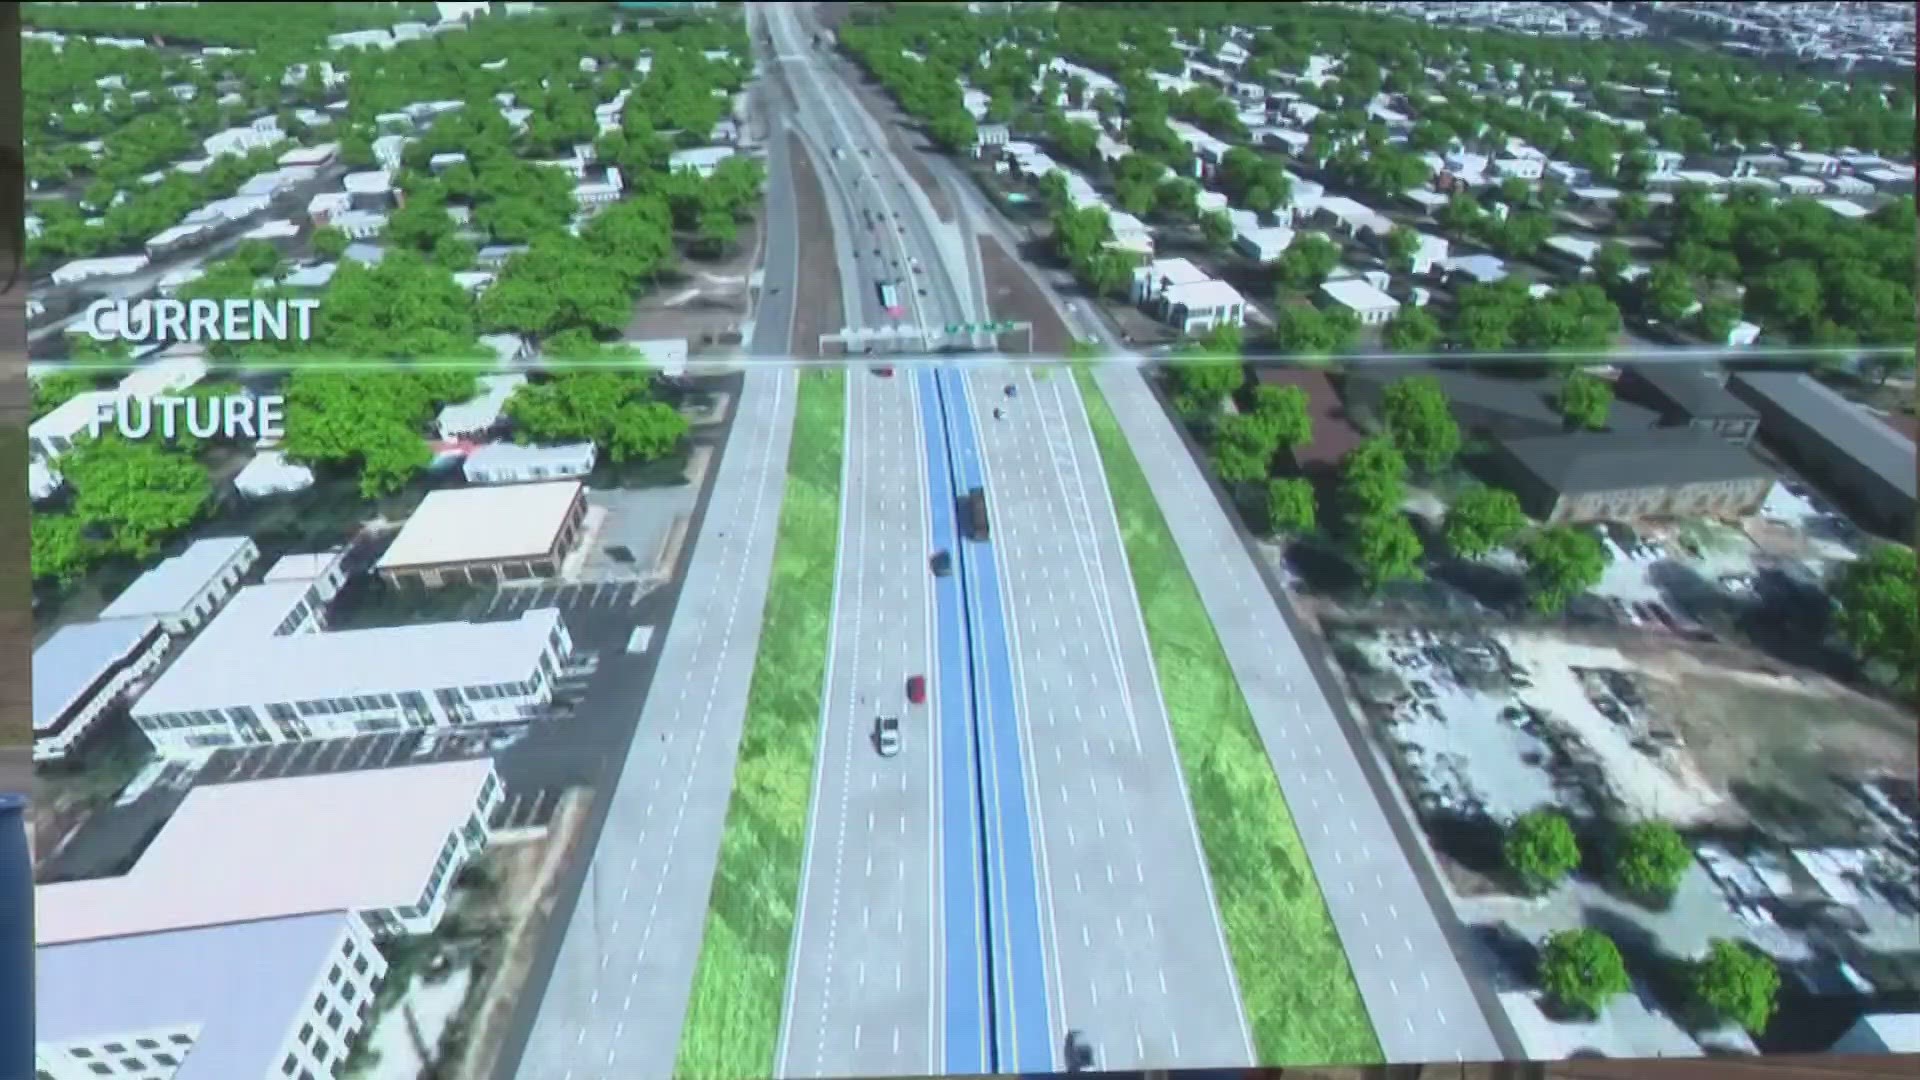 The project will cost $606 million and will be on I-35 between State Highway 45 and U.S. 290 East.